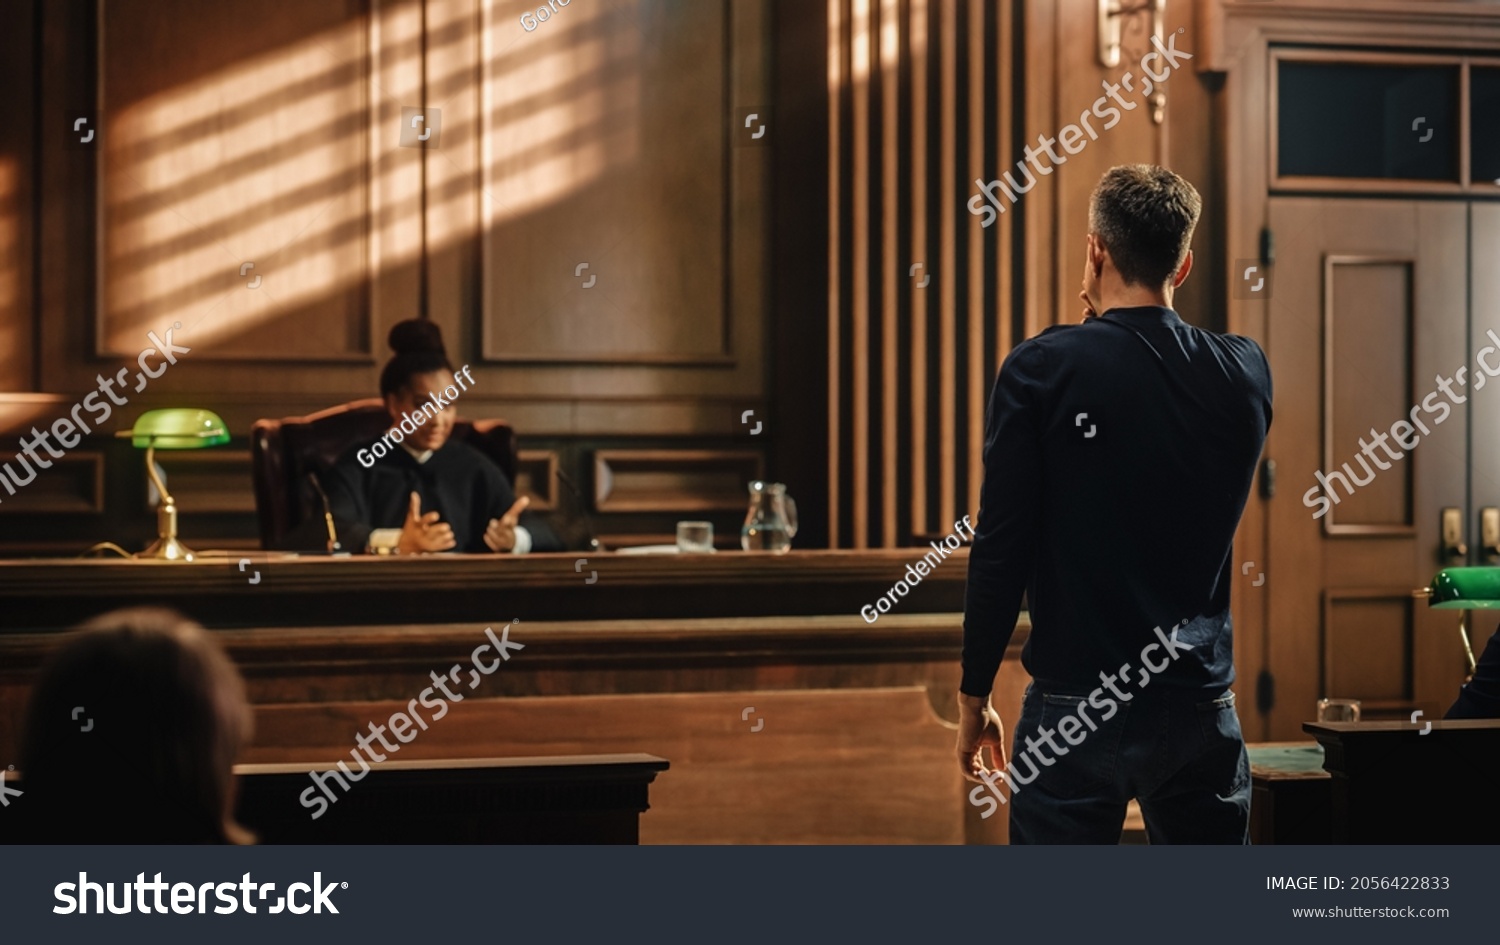 Court of Law and Justice Trial Proceedings: Male Law Offender is Questioned and Giving Testimony to Judge, Jury. Criminal Denying Charges, Pleading, Judge Accuses Guilty Defendant. #2056422833